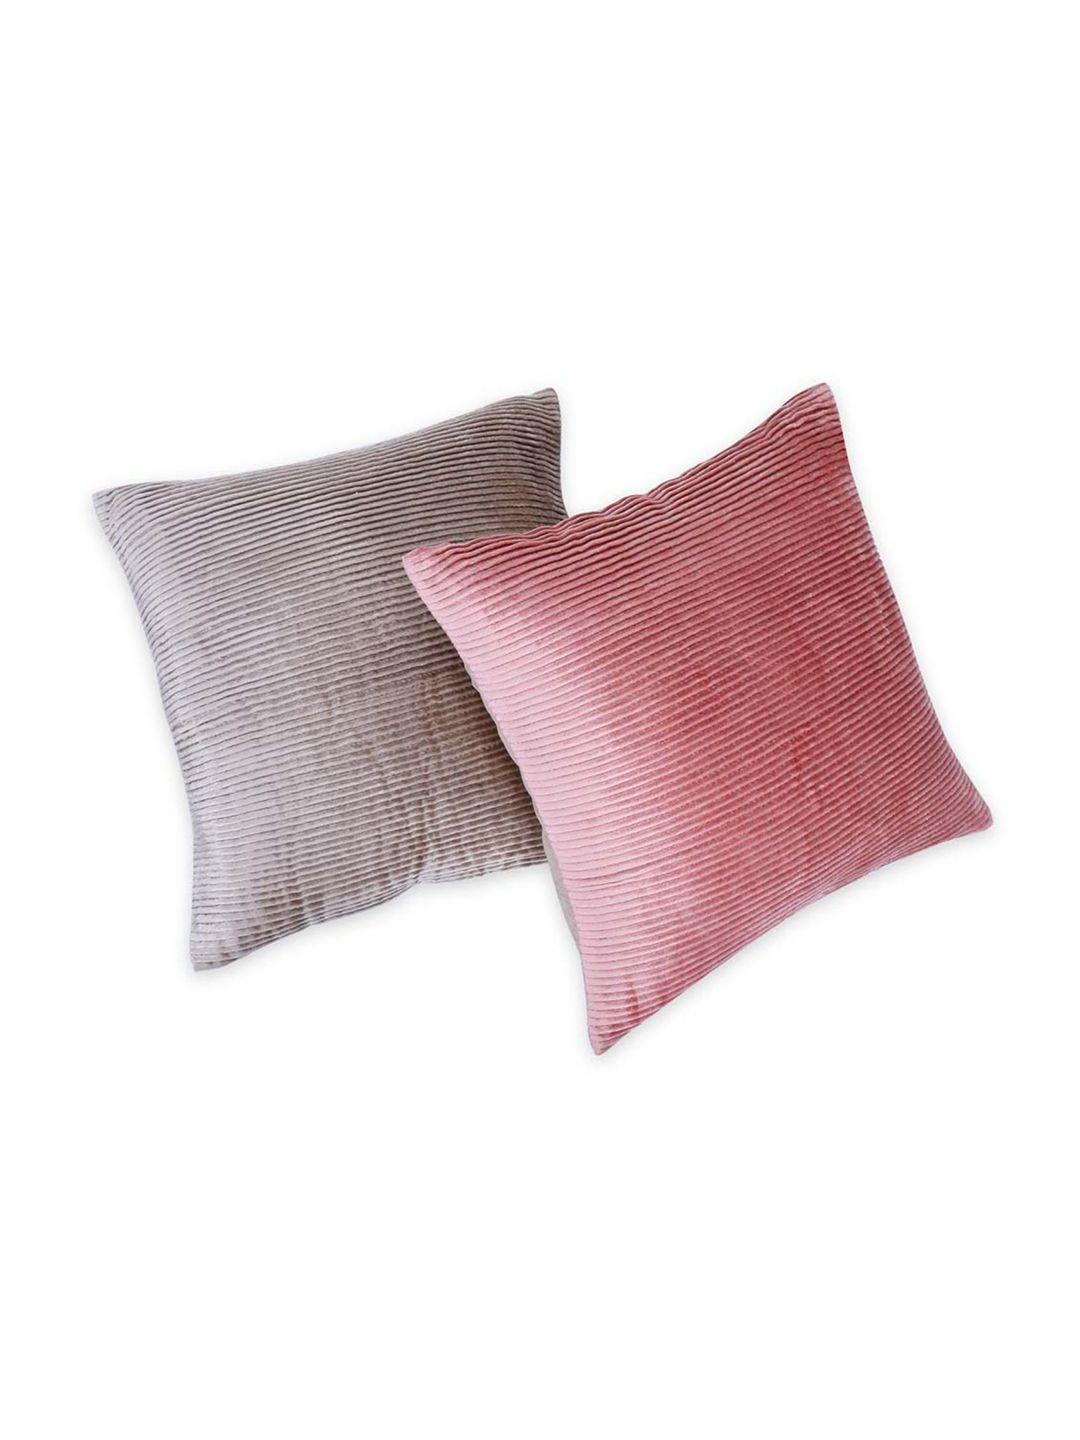 haus & kinder Rose & Grey Set of 2 Striped Square Cushion Covers Price in India